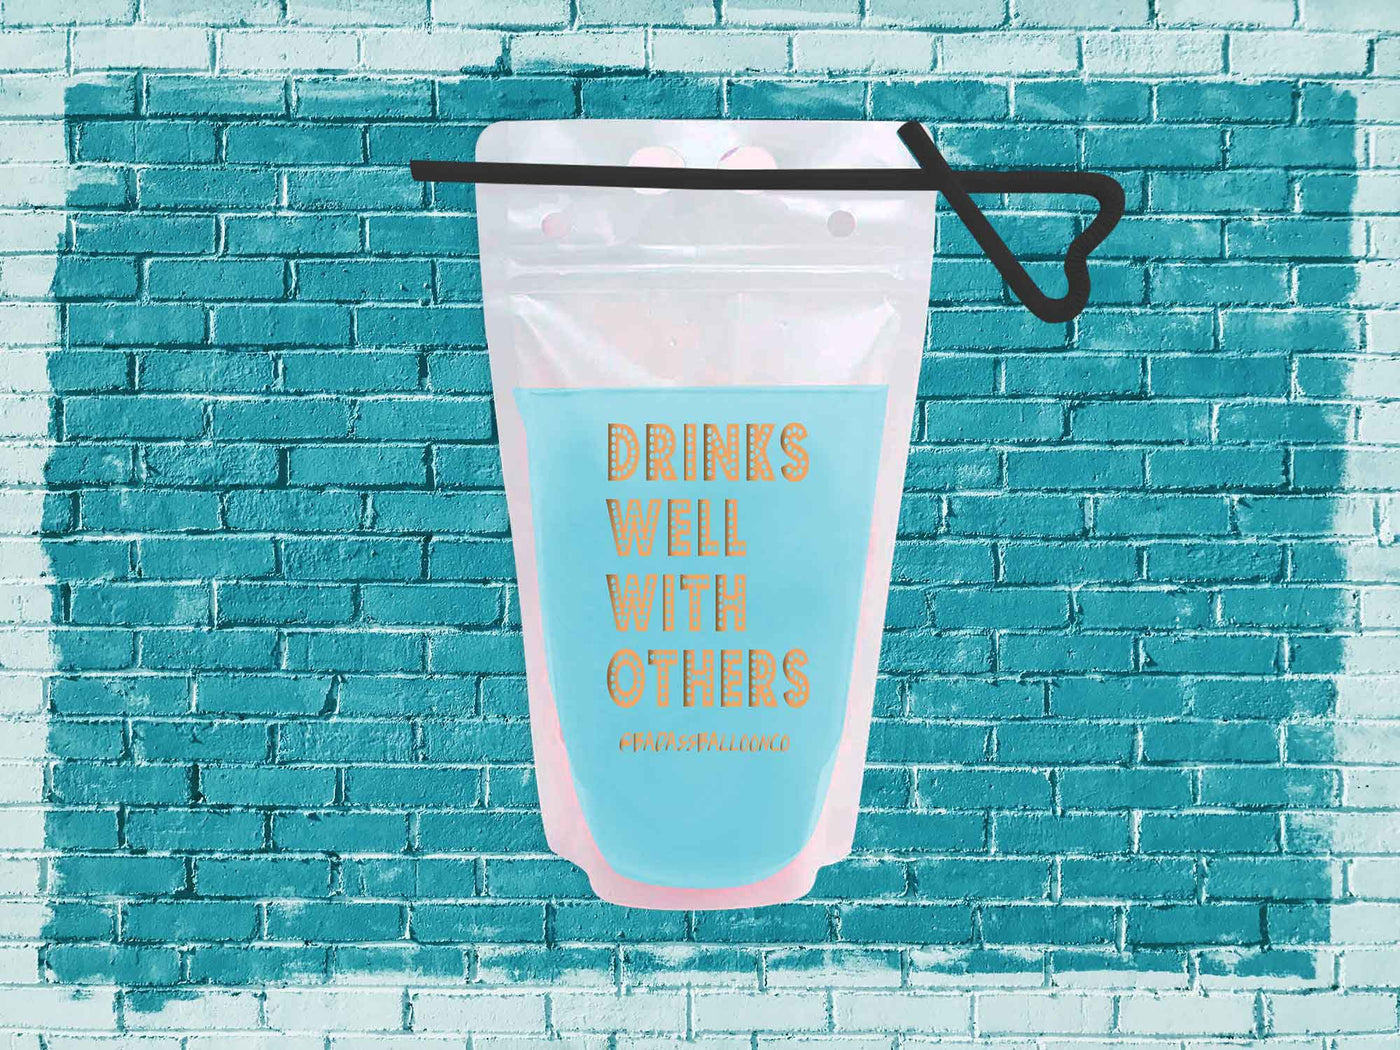 Drinks Well with Others Drink Pouch | Bachelorette Decor